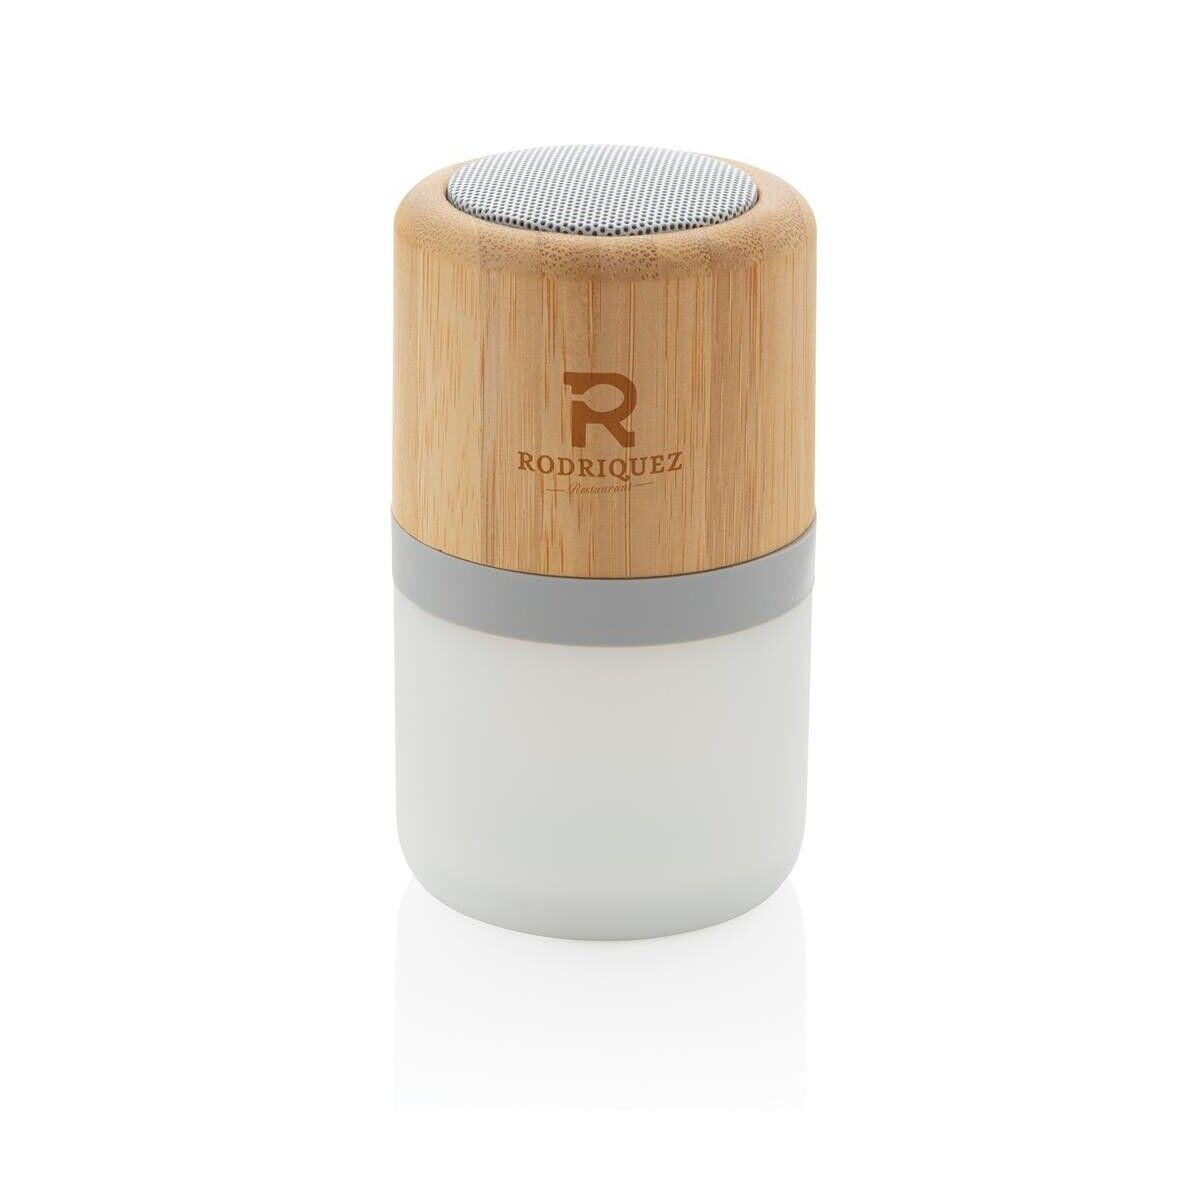 Bamboo Colour changing Speaker